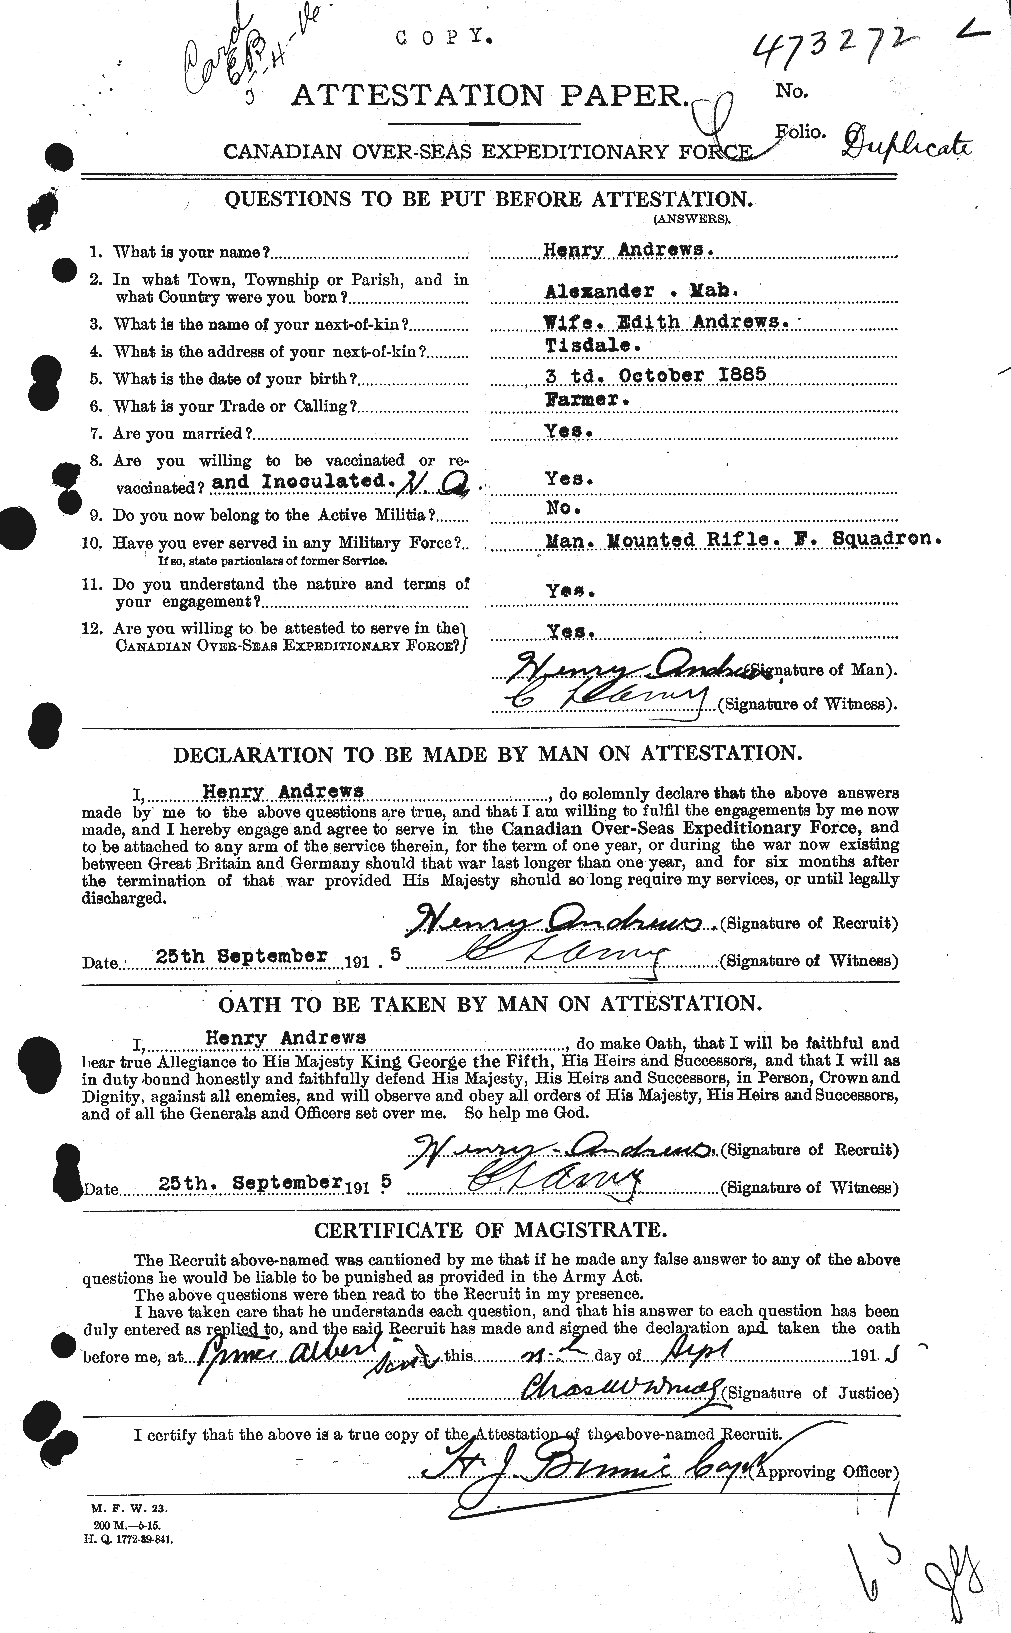 Personnel Records of the First World War - CEF 210278a